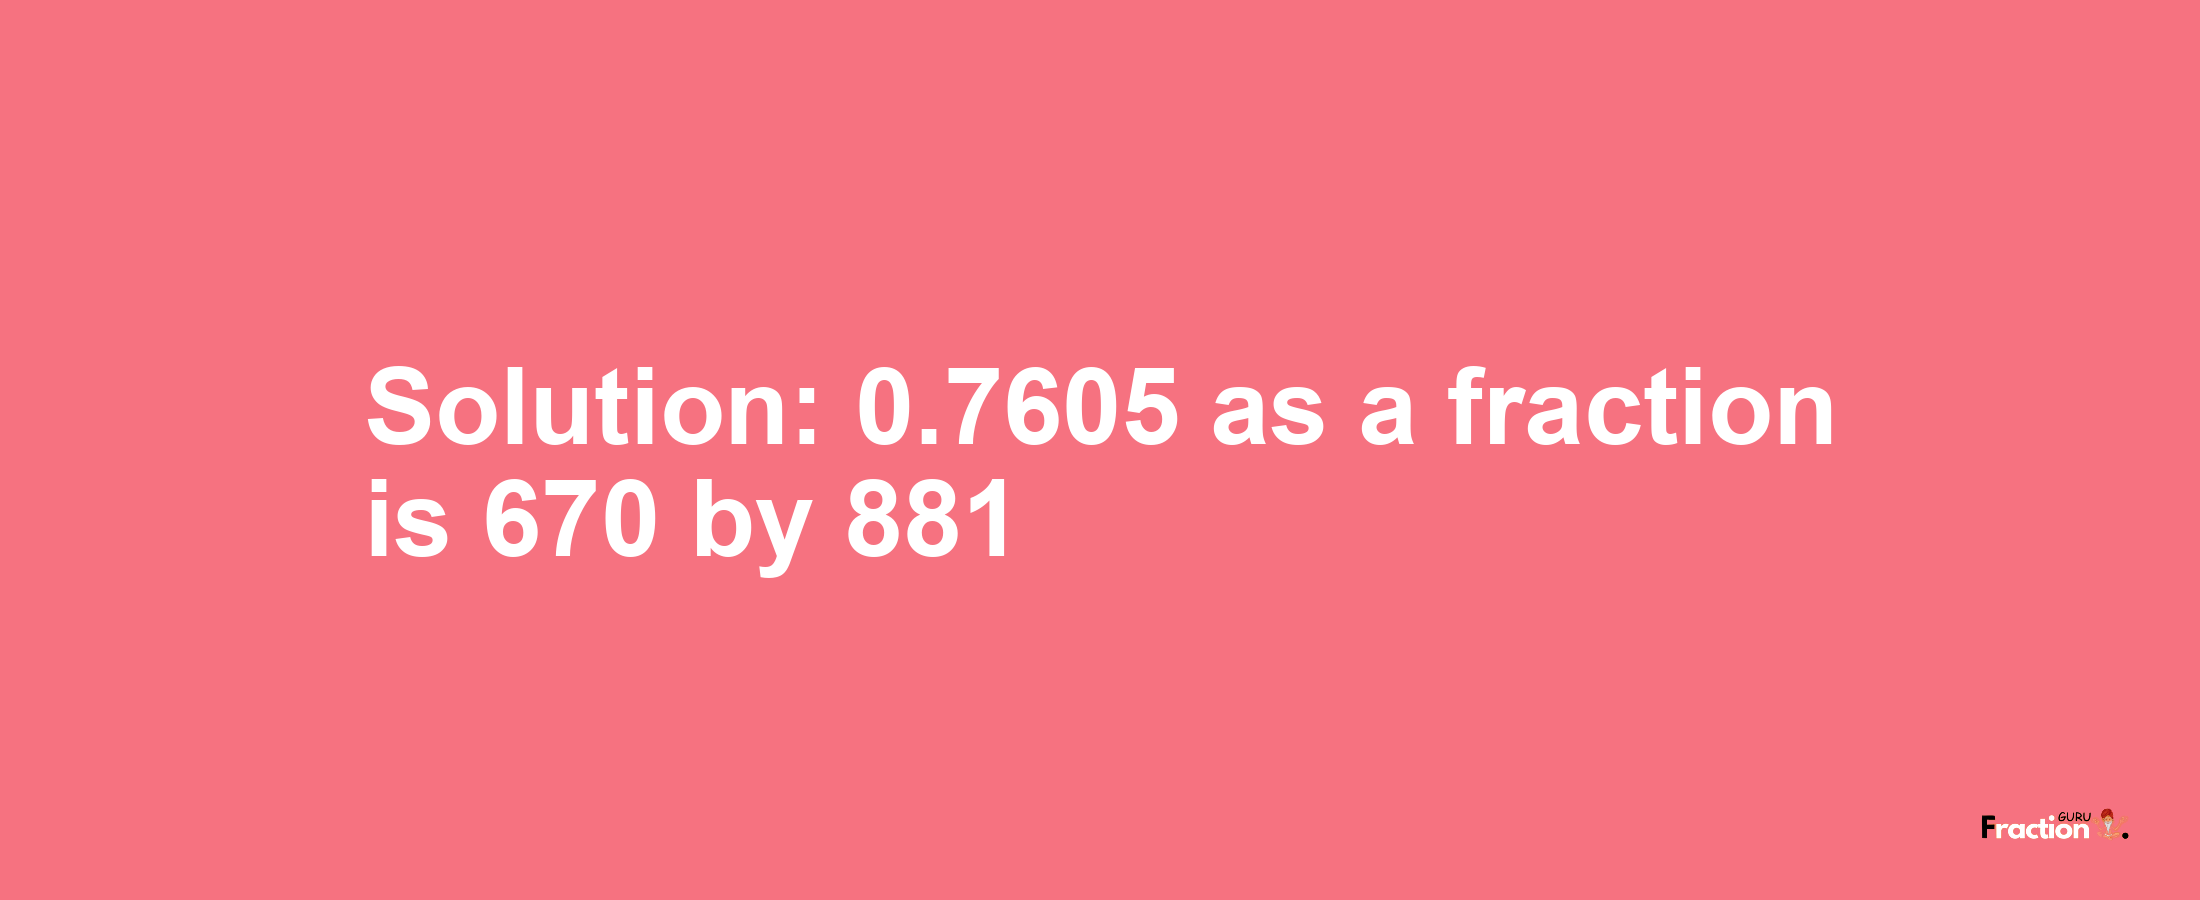 Solution:0.7605 as a fraction is 670/881